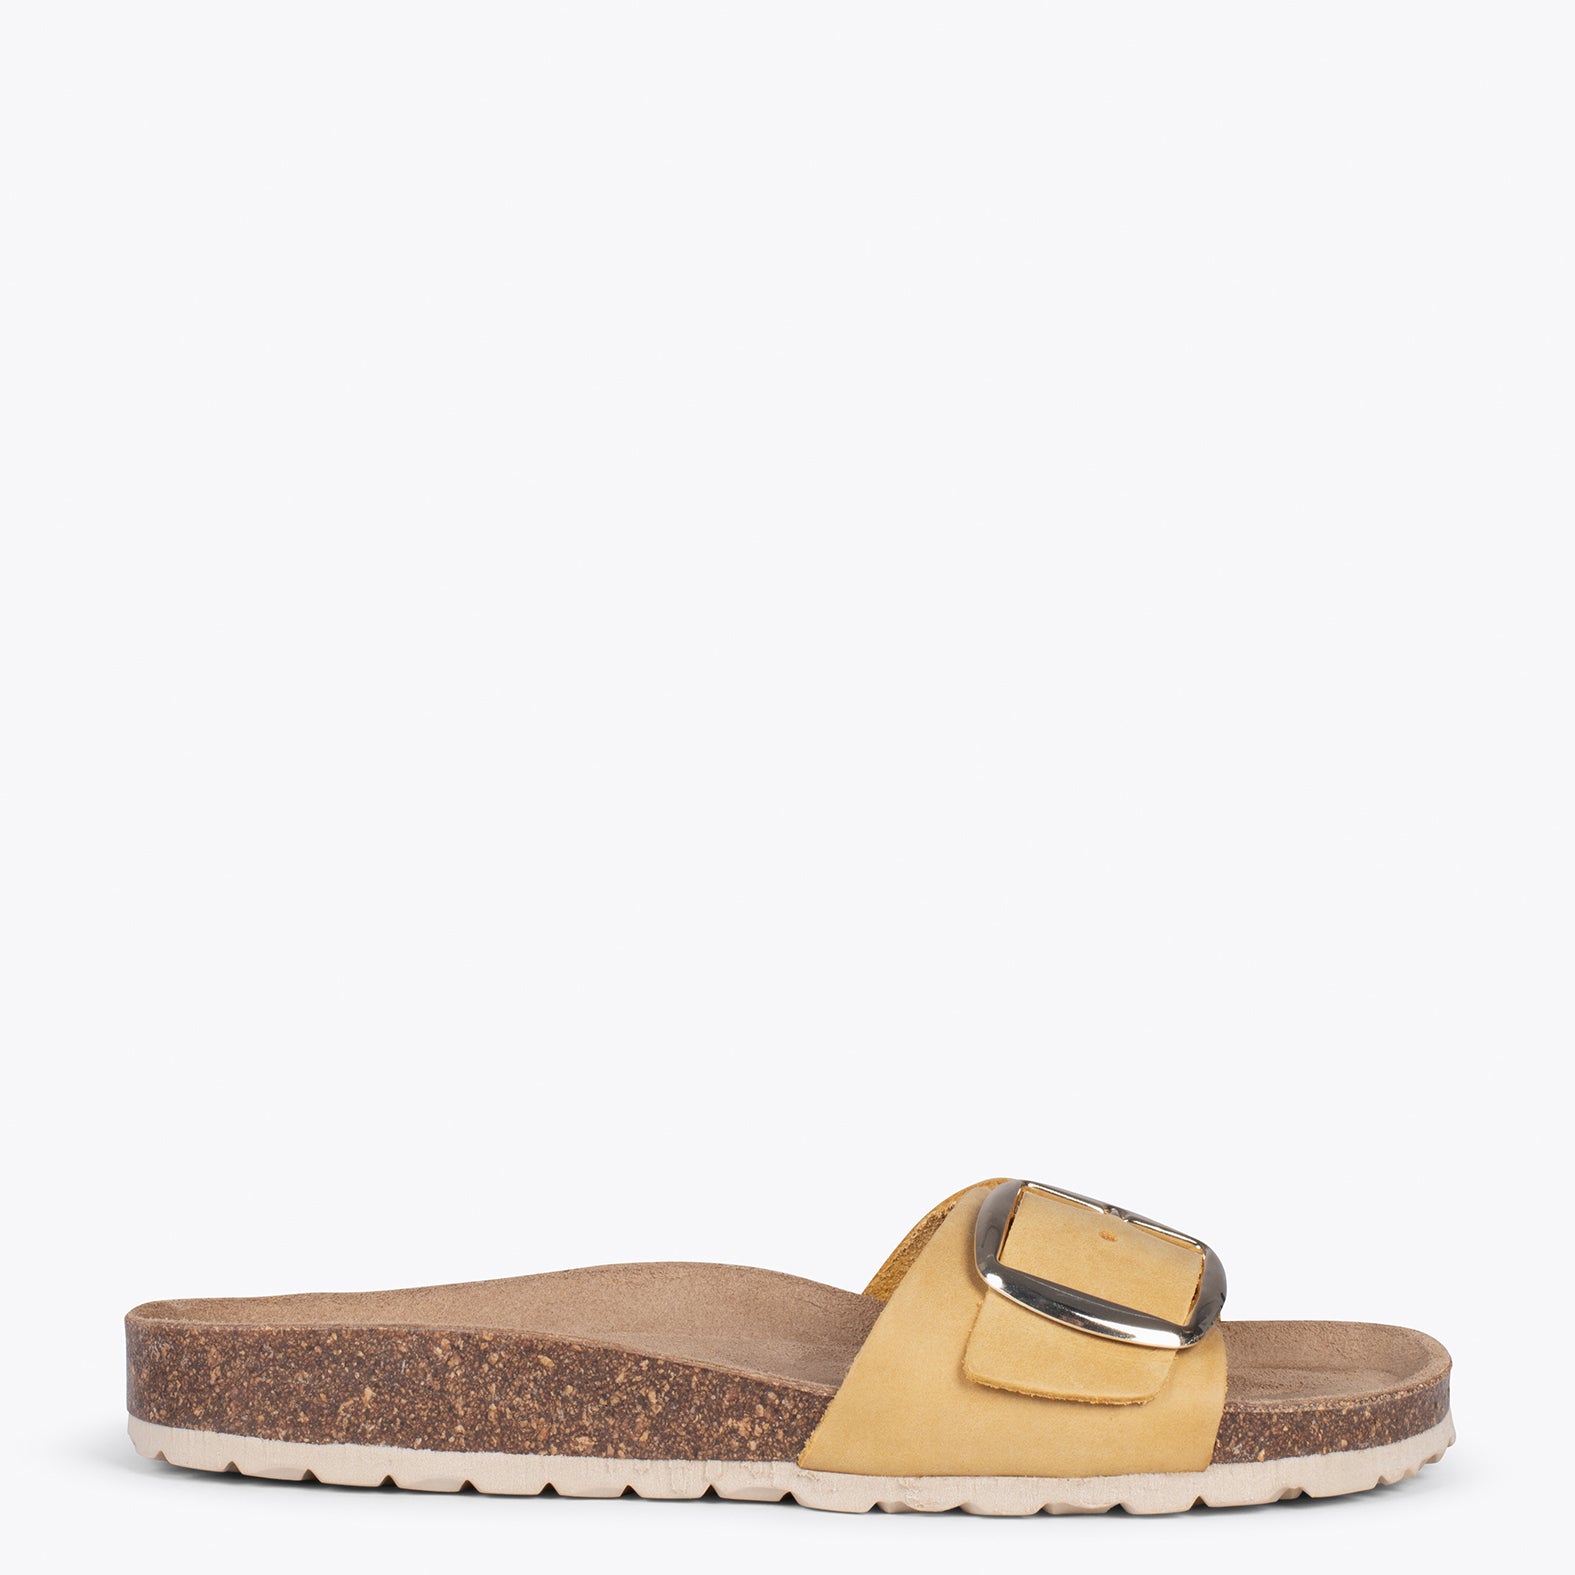 CLAVEL – MUSTARD leather slides with buckle